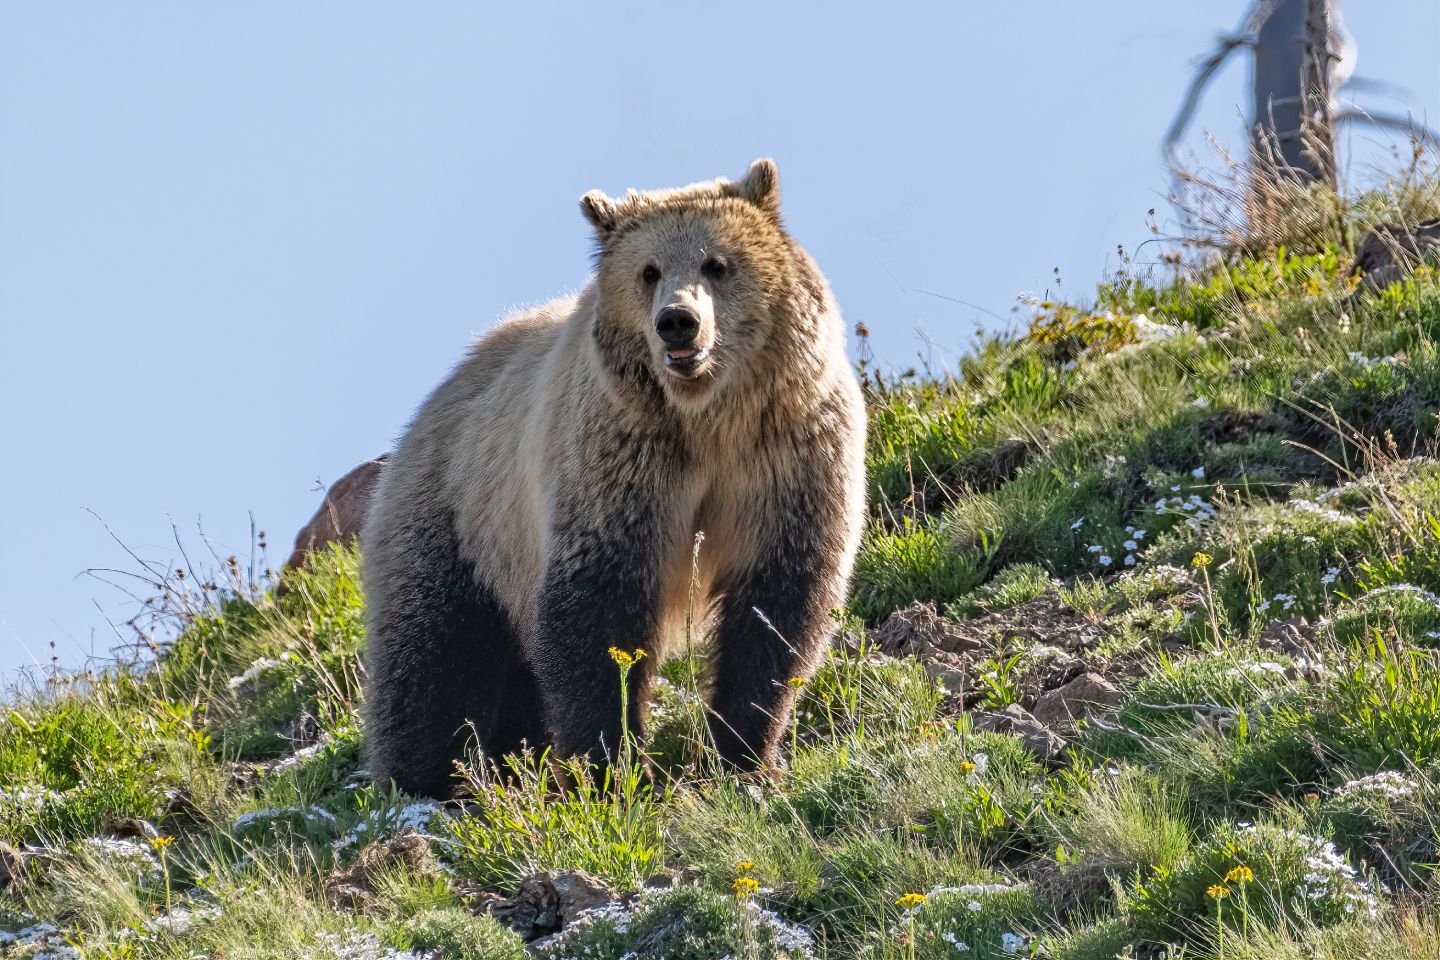 Grizzly bear standing still and looking toward camera on a small hill